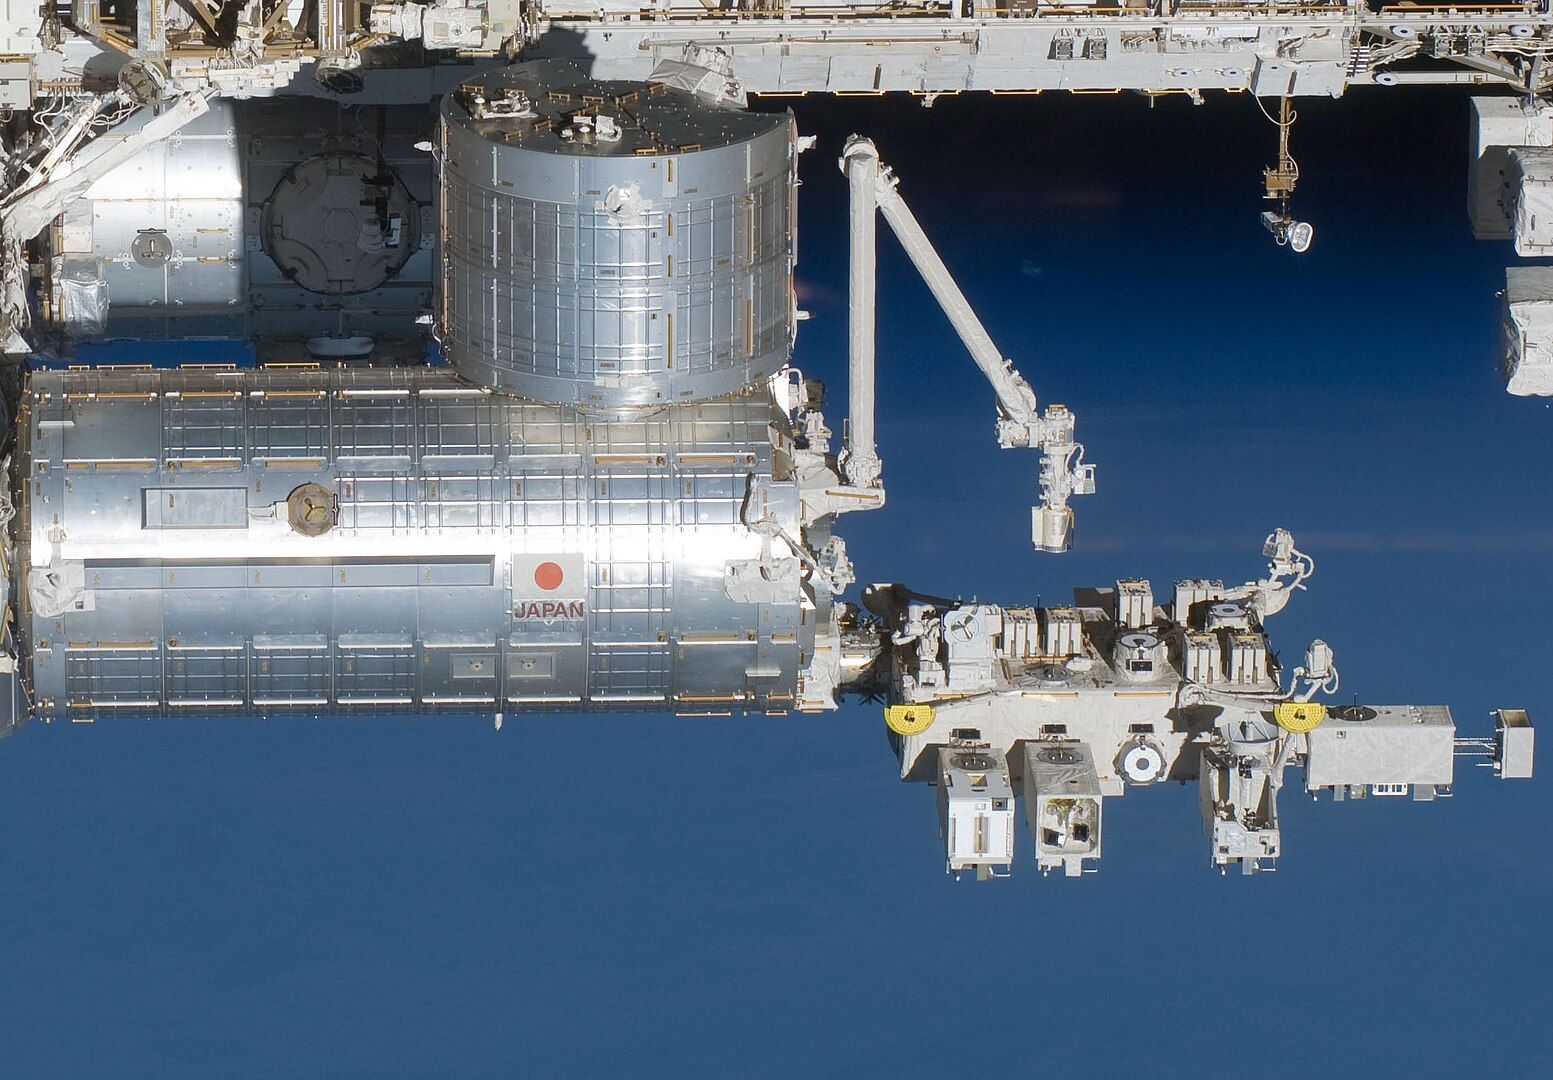 The Japanese Experiment Module attached to the International space station.